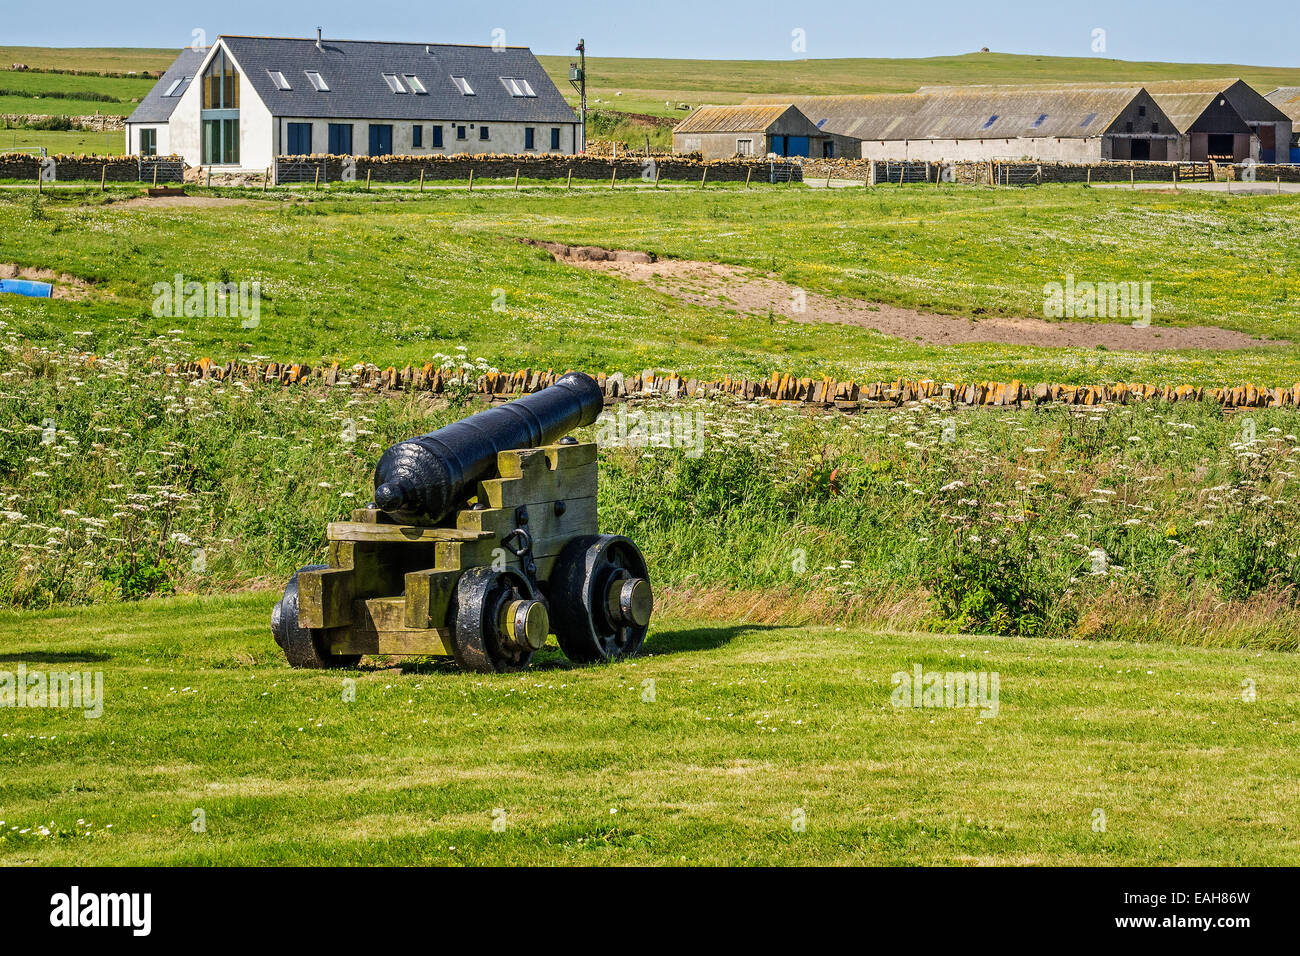 Cannon On The Lawns Of Skaill House Orkney Islands UK Stock Photo